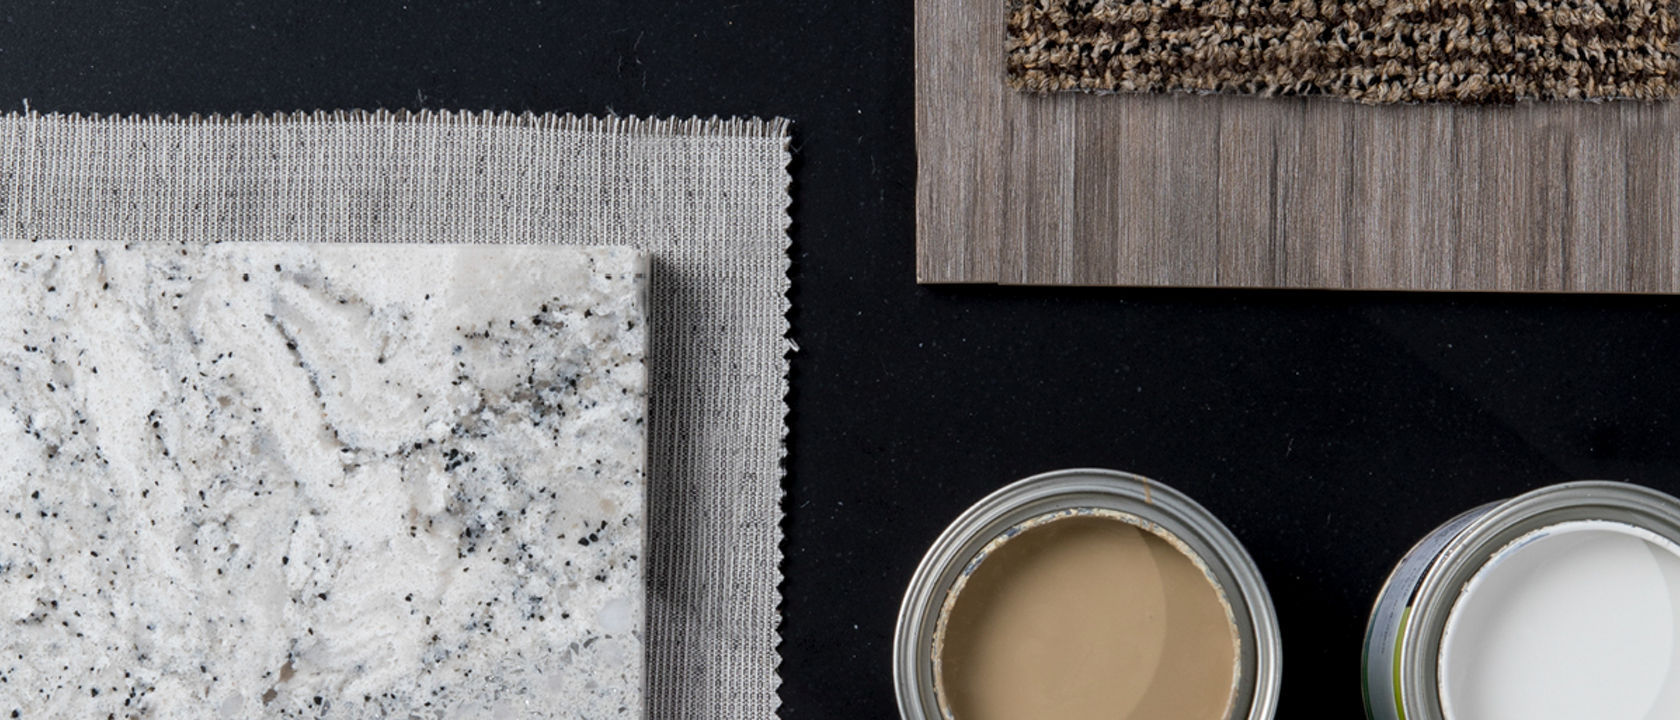 A moodboard featuring a Cambria Blackpool Matte quartz countertop with a wood panel, two candles, and a slab of Cambria Summerhill quartz over a gray cloth.